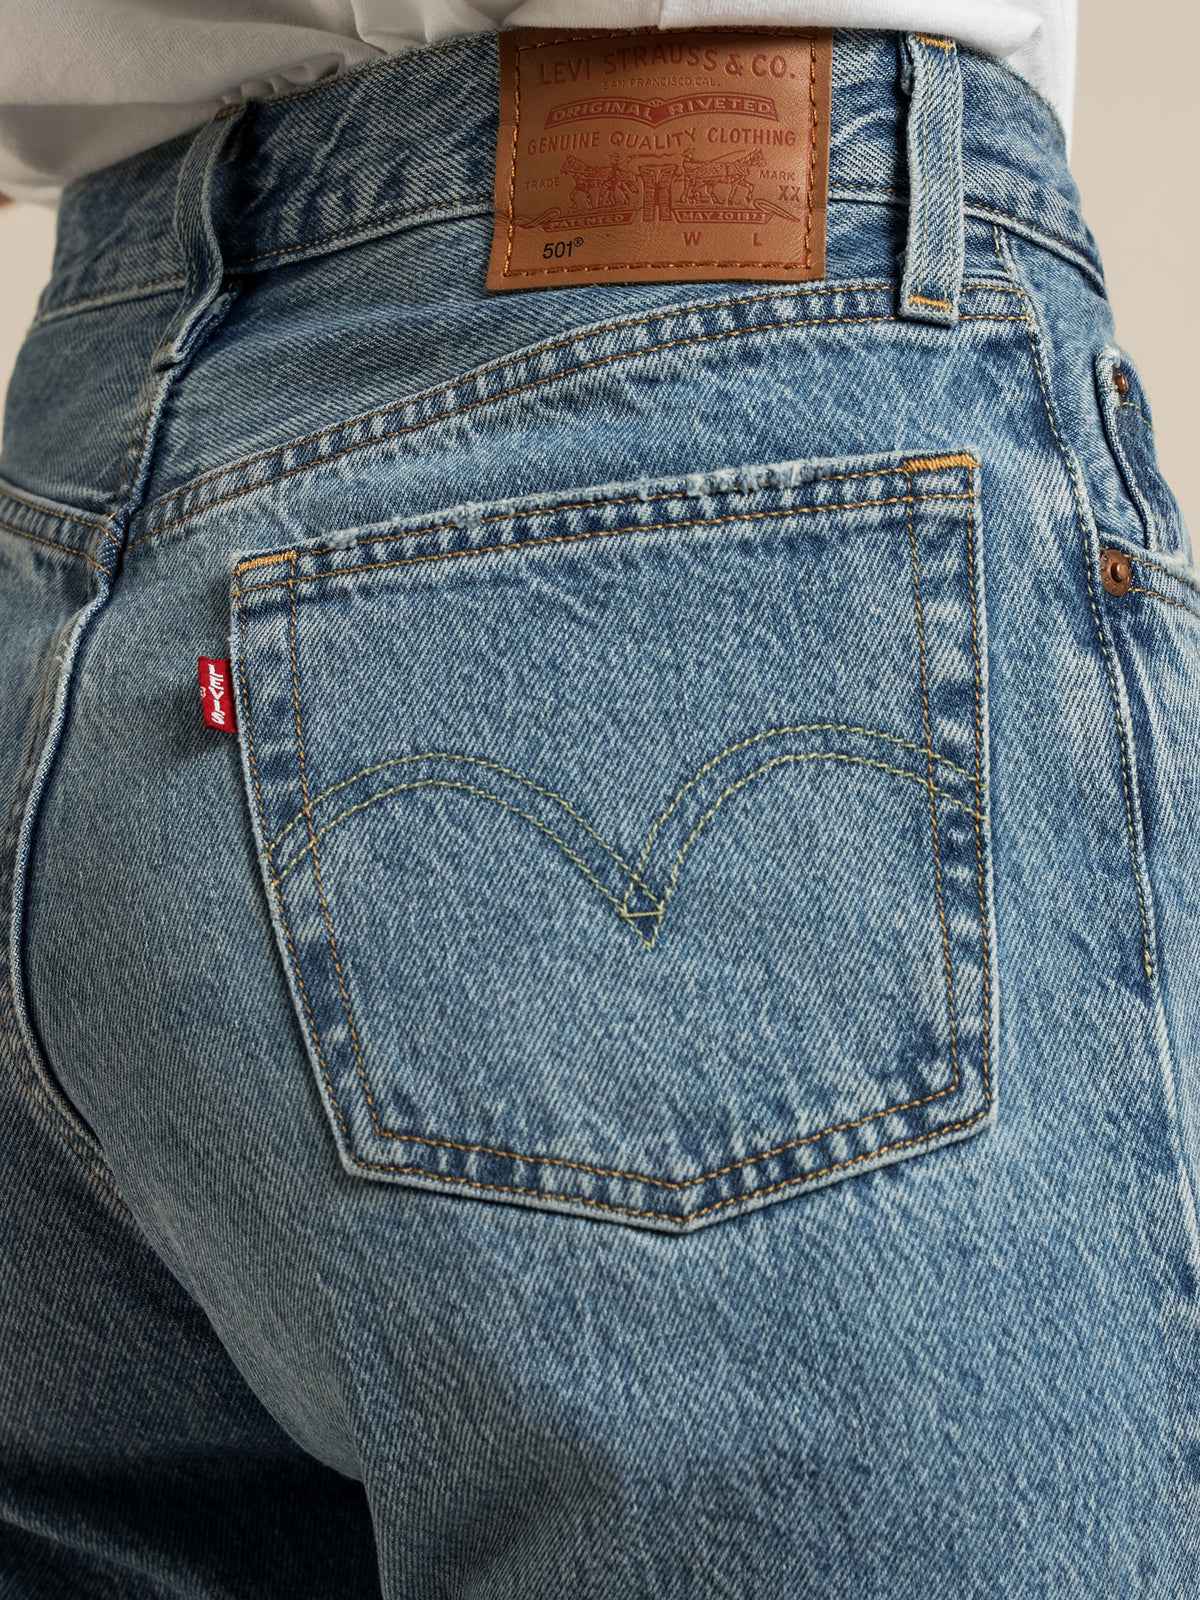 501 Original Cropped Jeans in Luxor Reconstruction